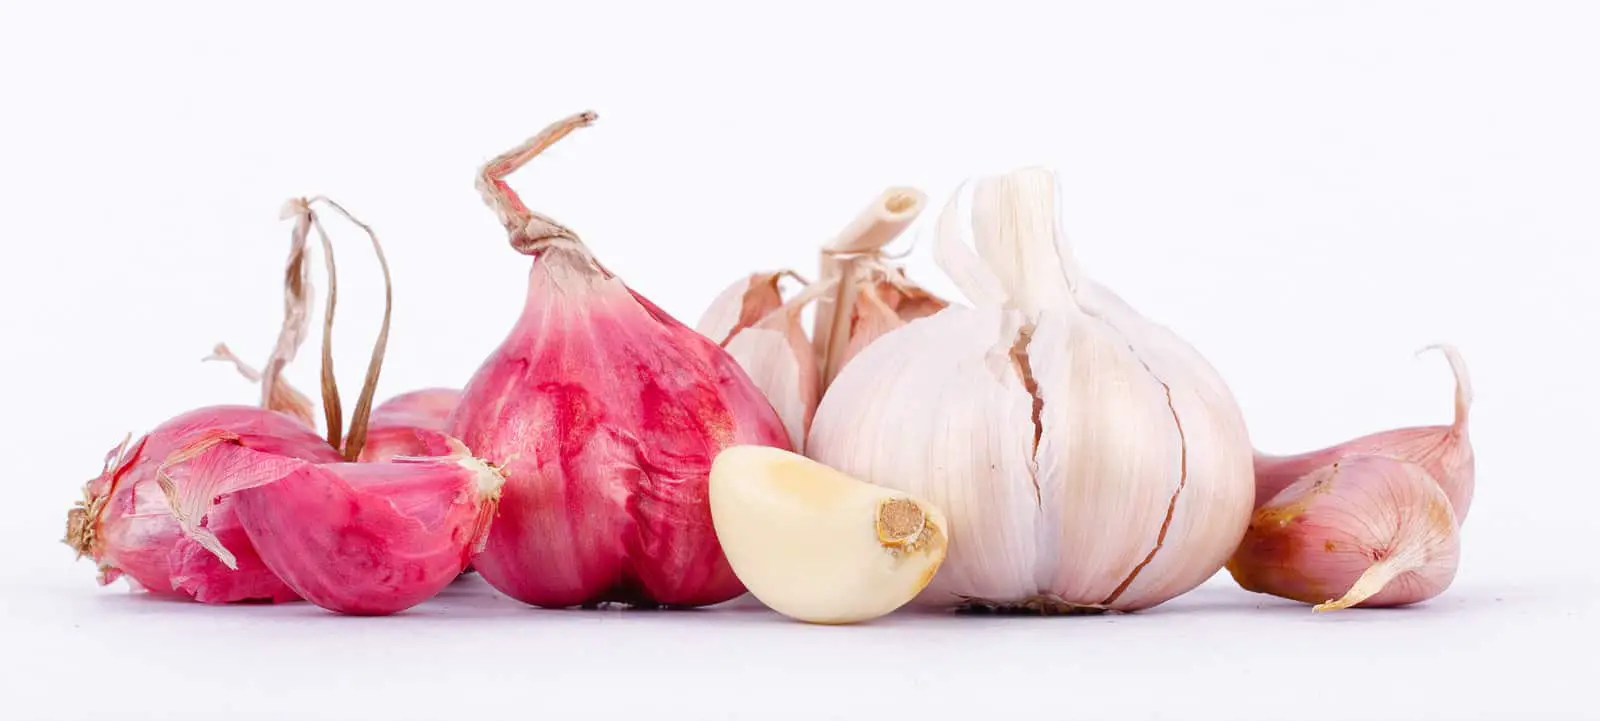 How to Store Onions, Shallots, and Garlic